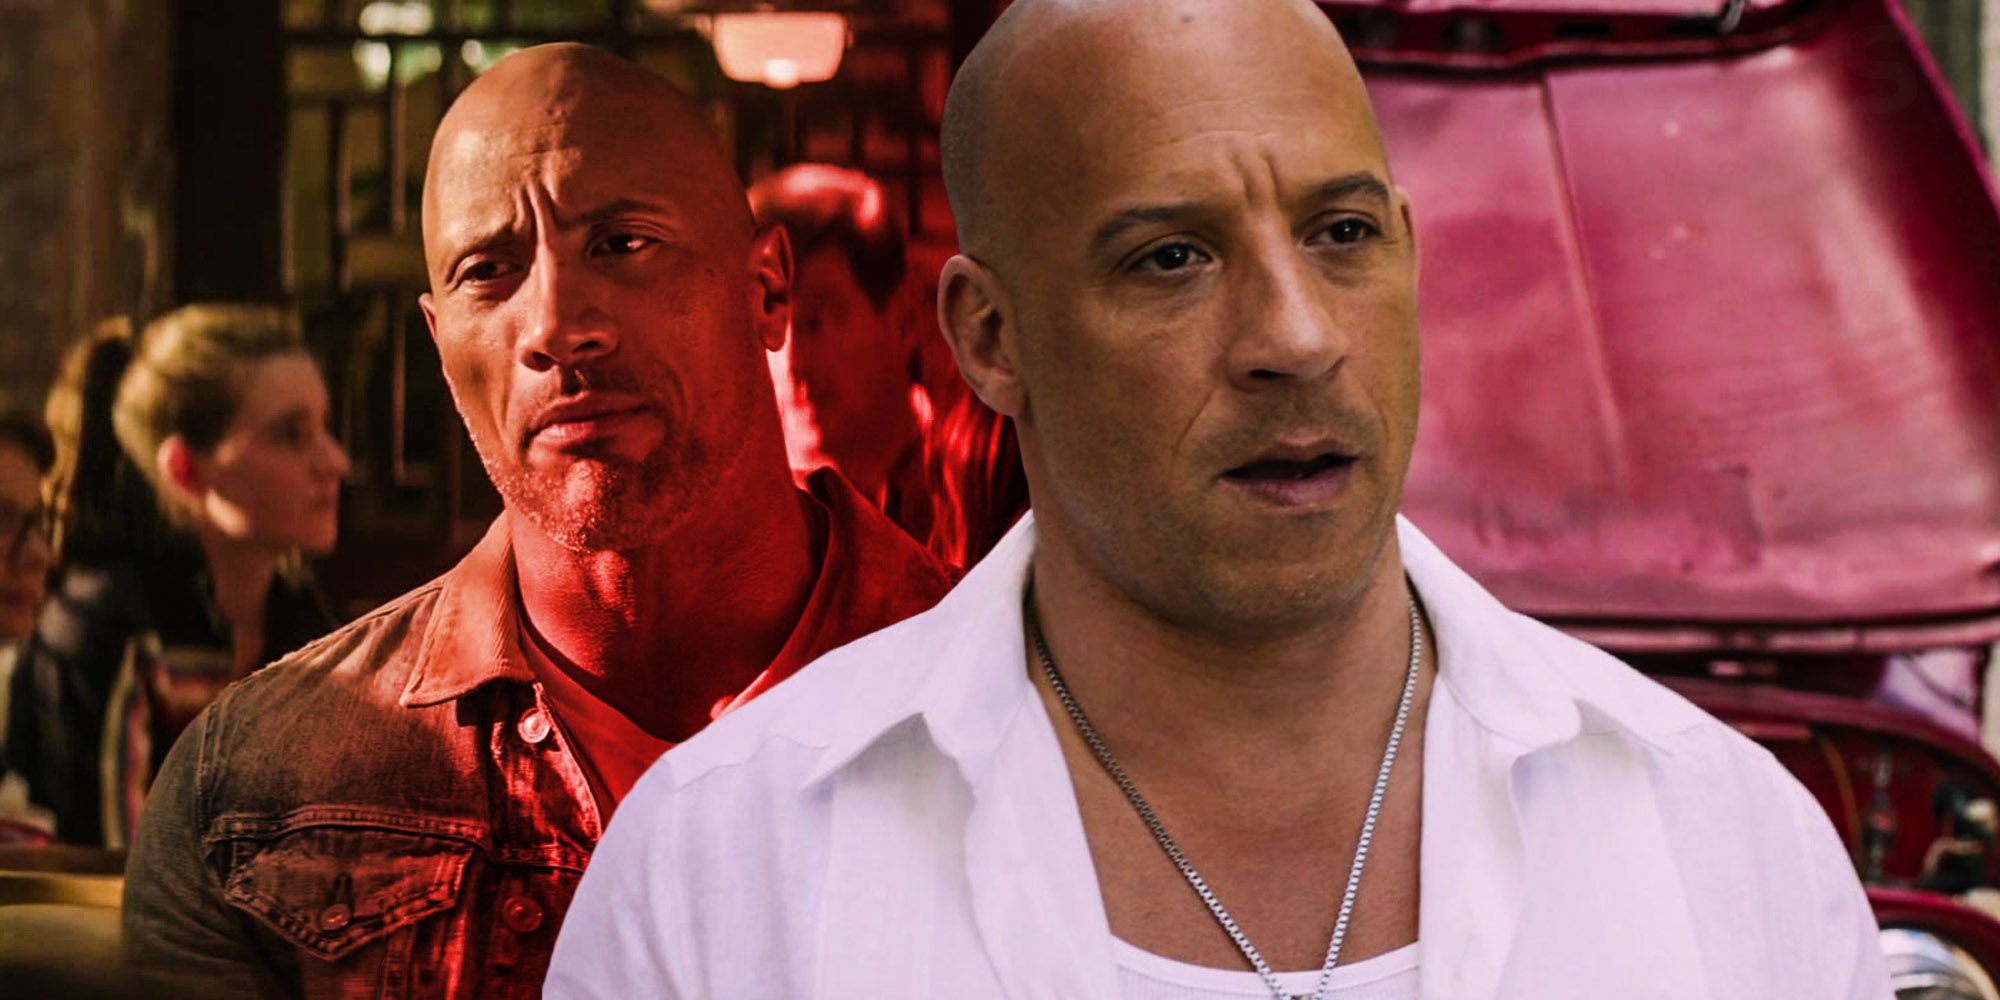 Fast and furious 9 Vin Diesel The rock Hobbs and Shaw